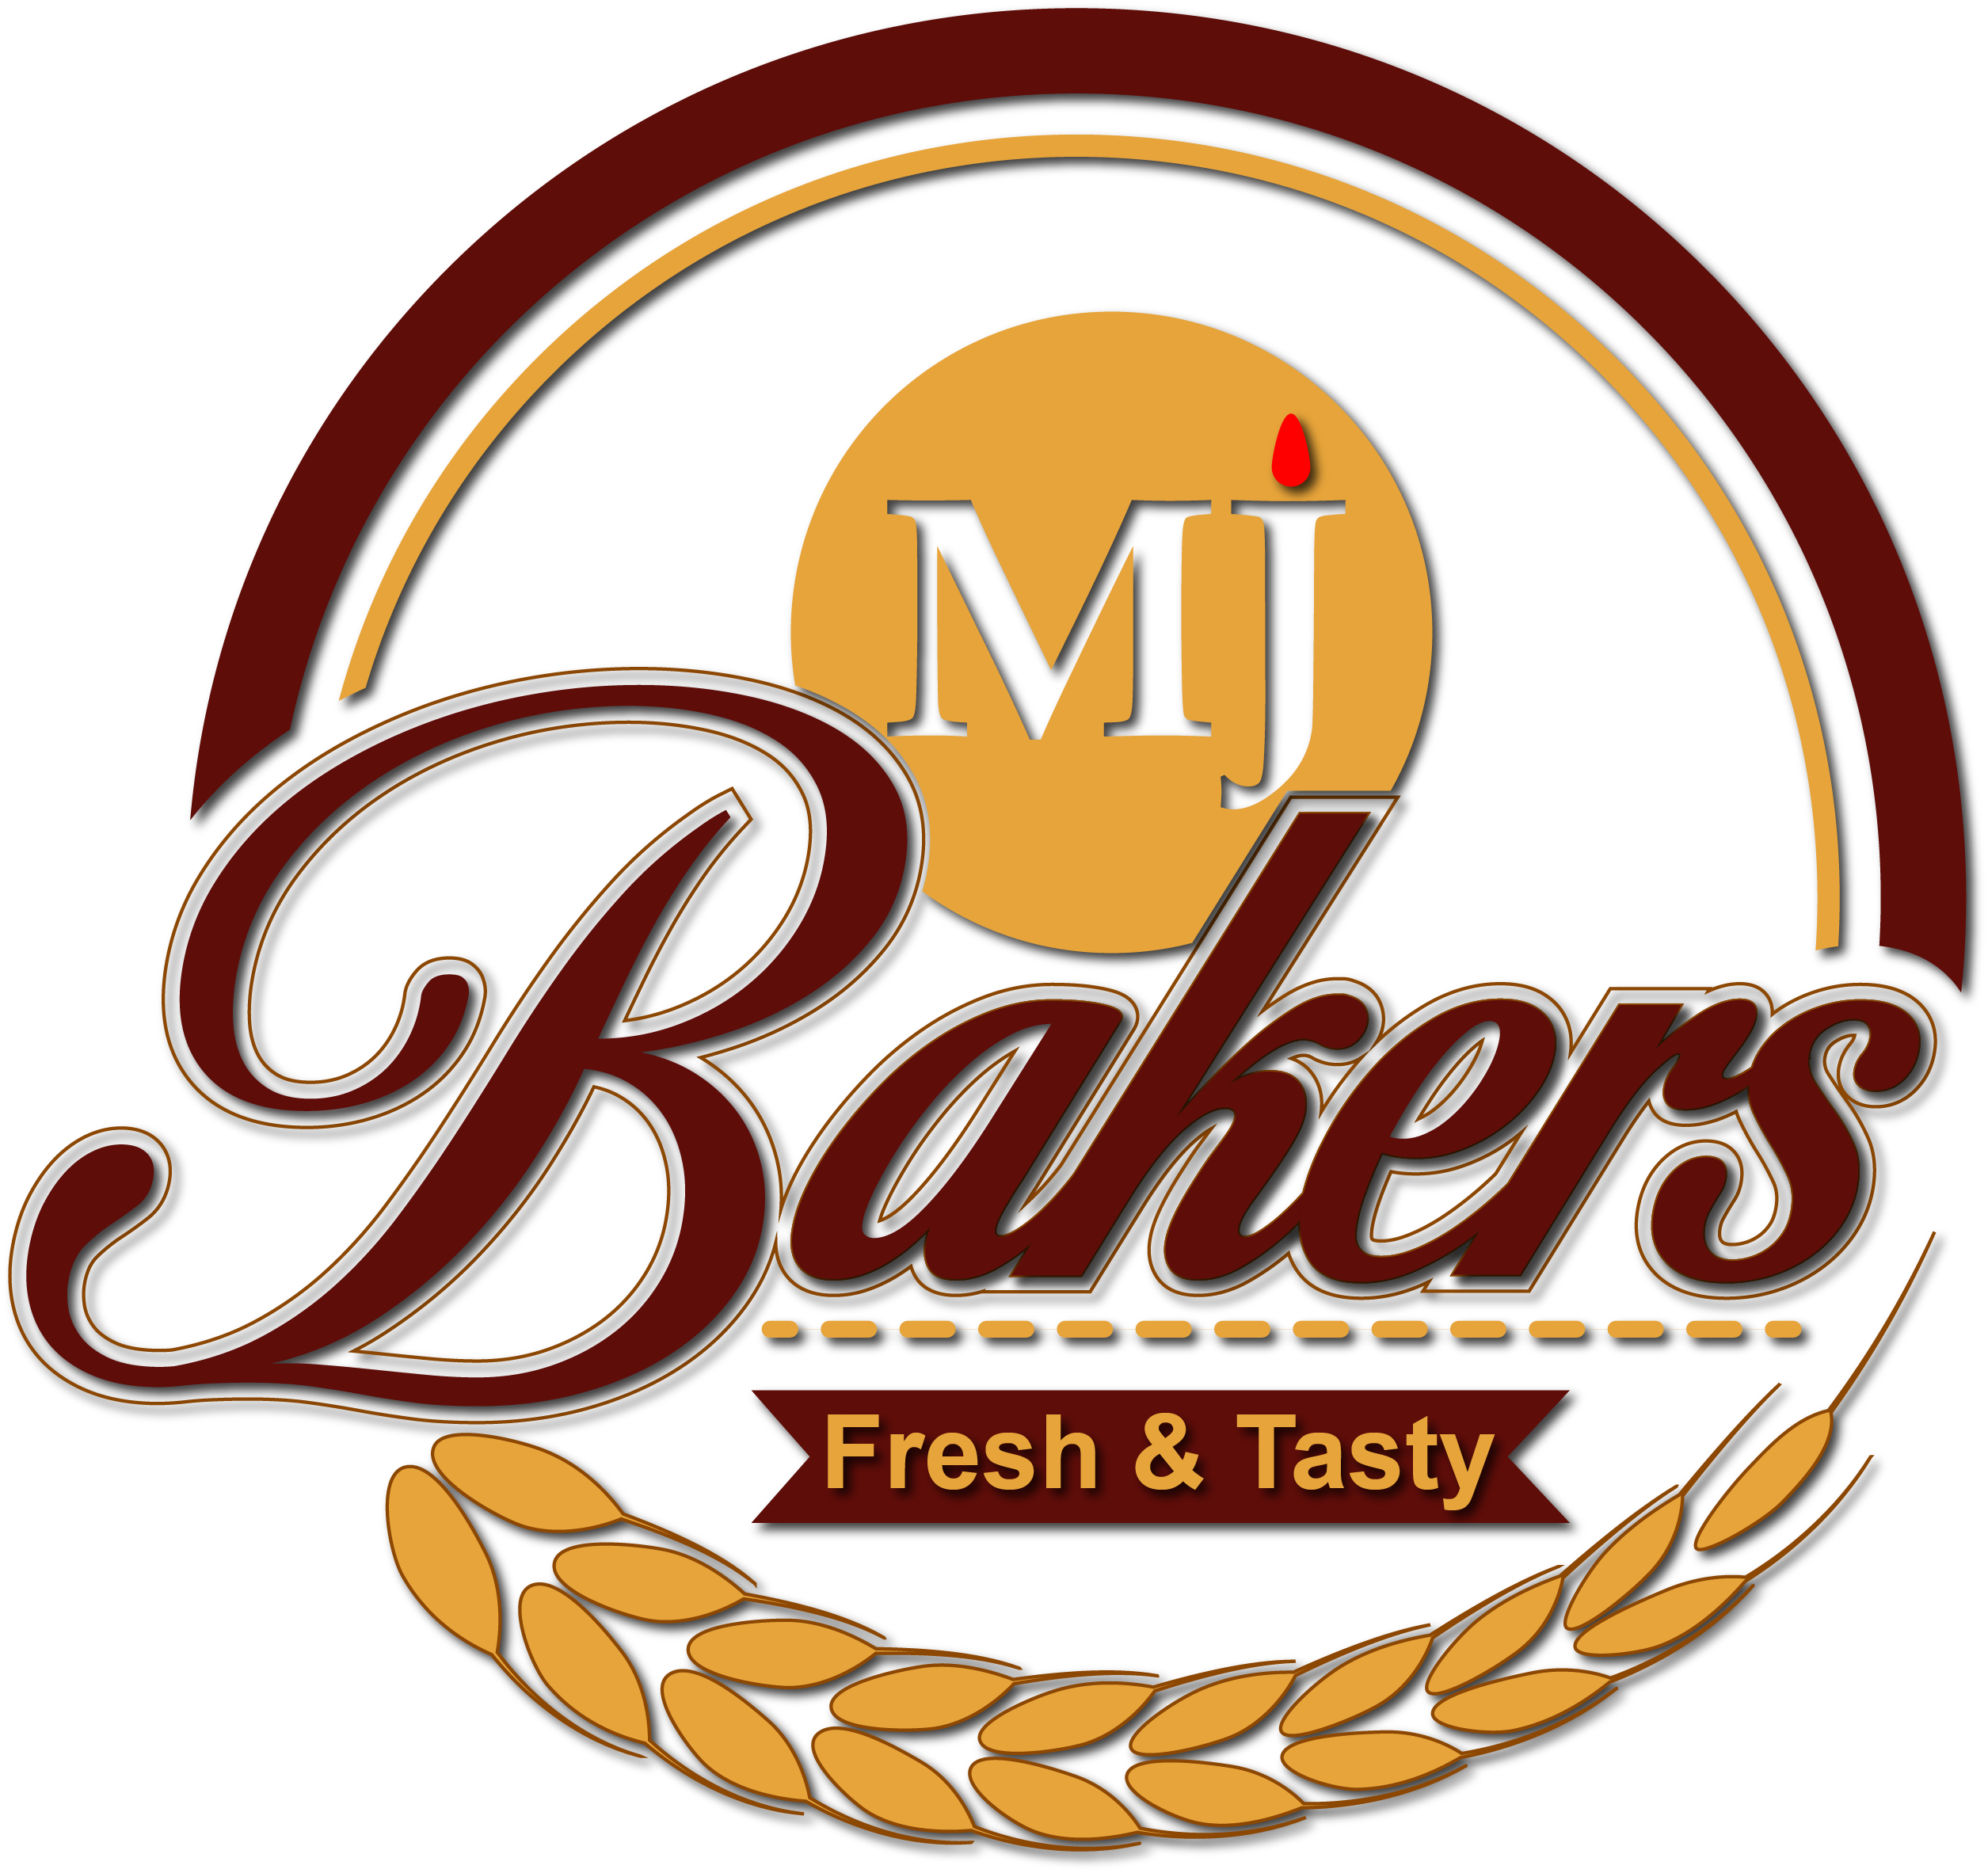 MJ bakers – Bakery Product Brand of India